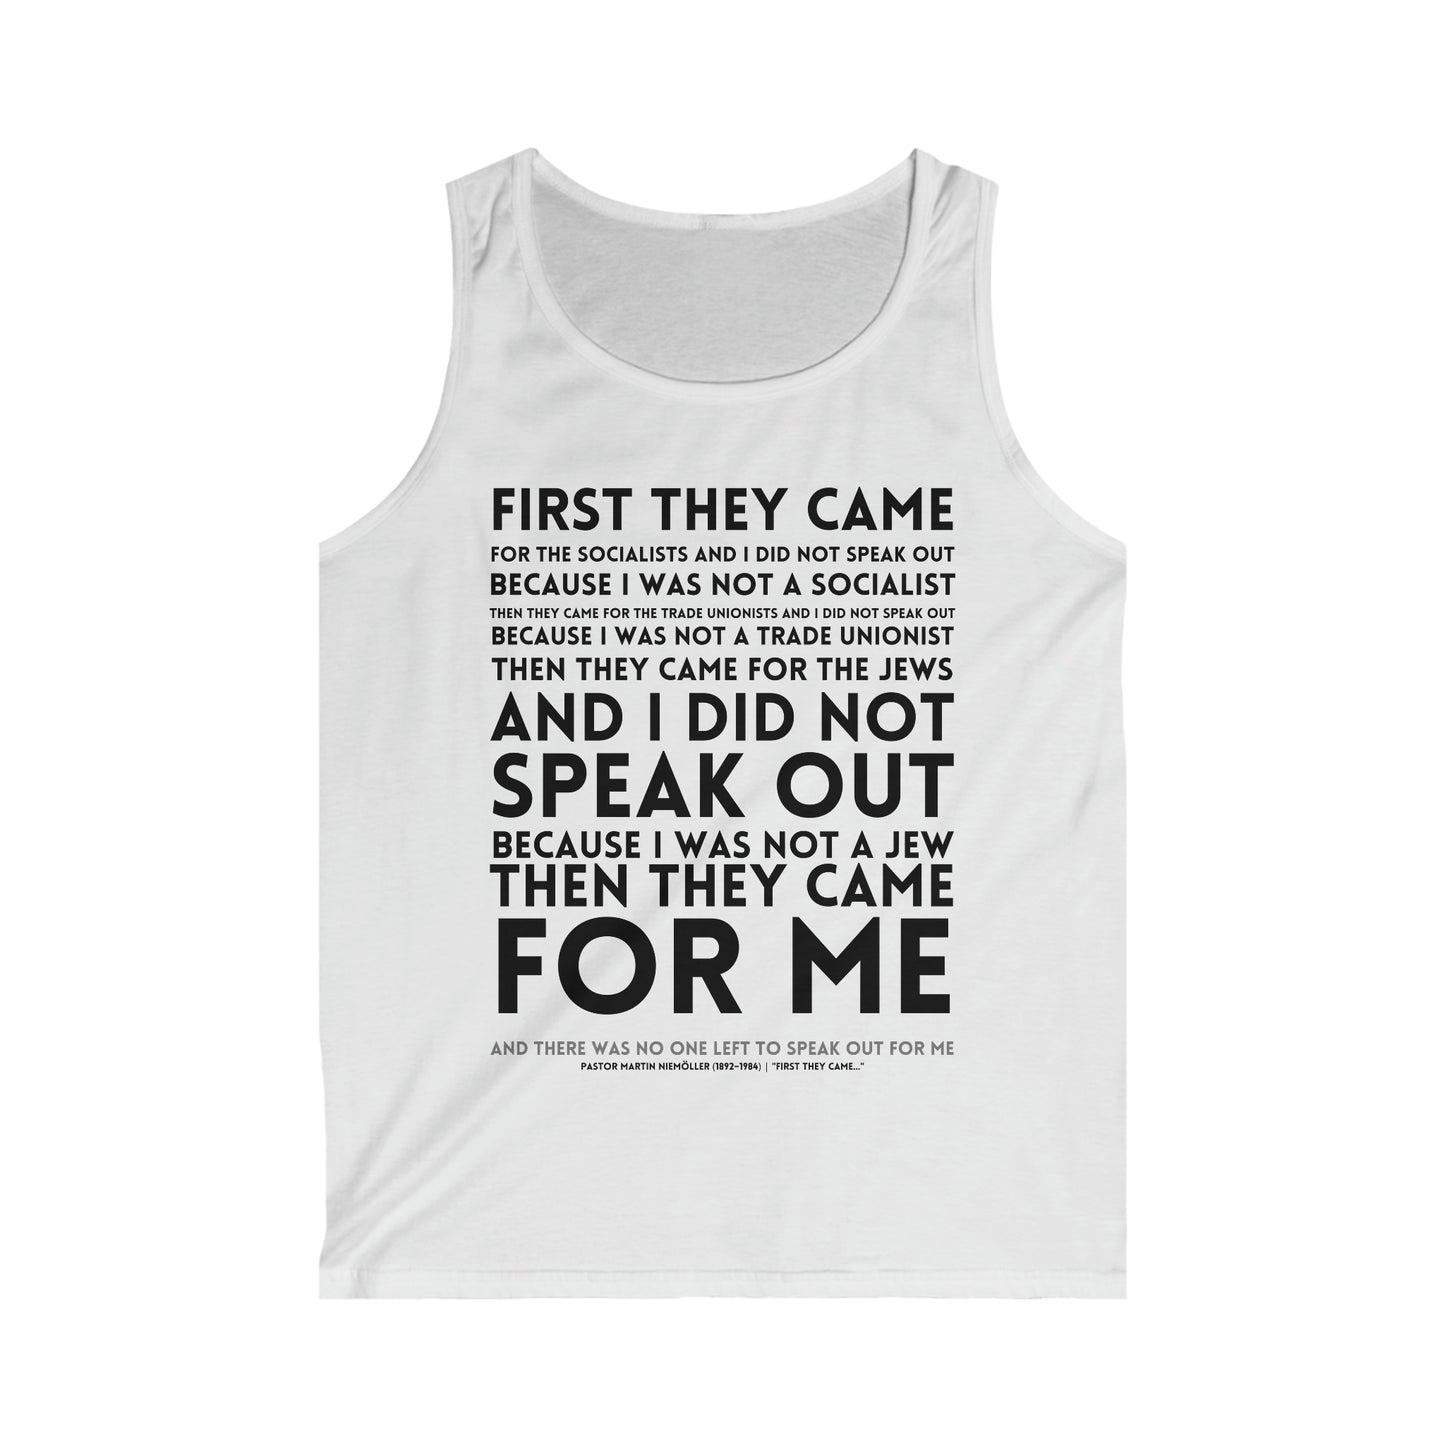 First They Came Men's Softstyle Tank Top